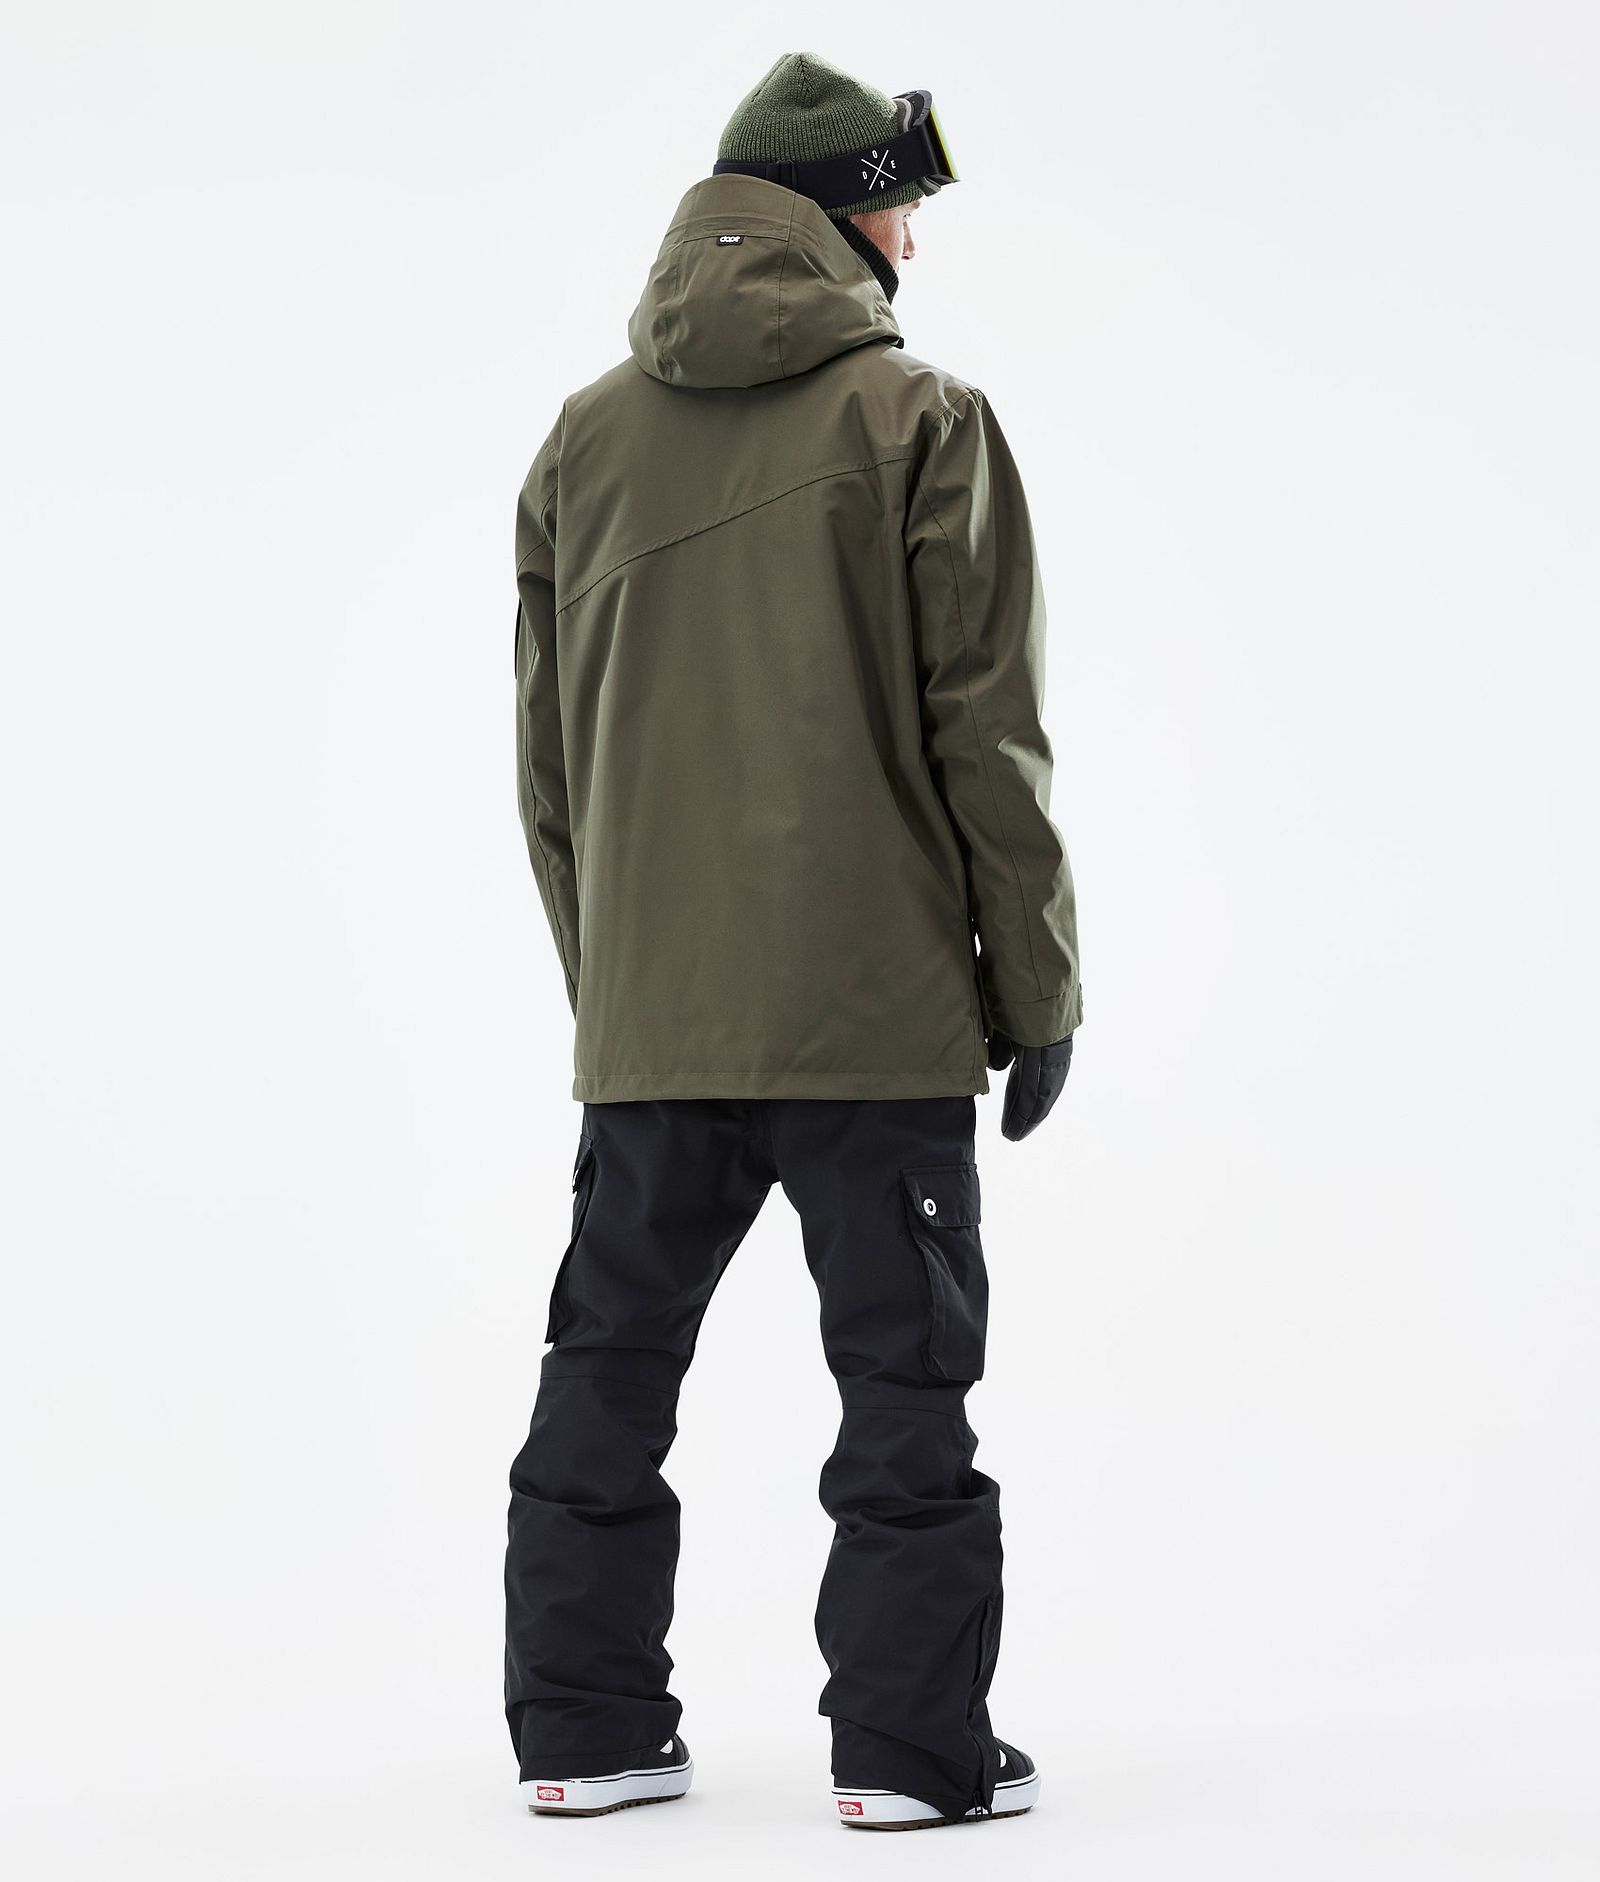 Adept Outfit Snowboard Uomo Olive Green/Black